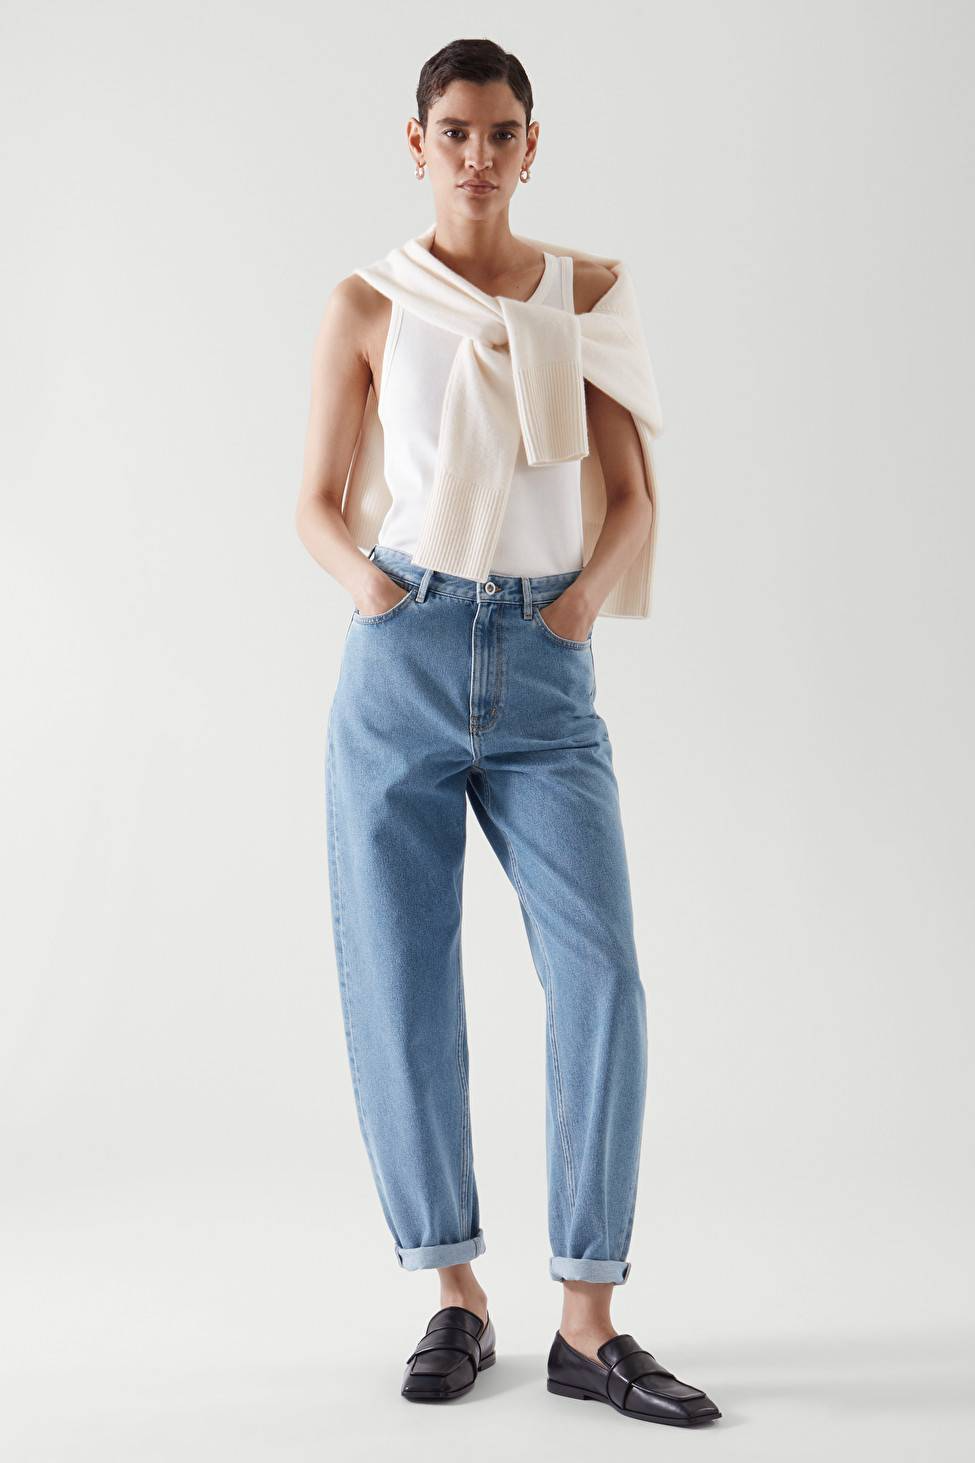 Stay on Trend with Tapered Jeans: Flattering Denim for Every Body Type